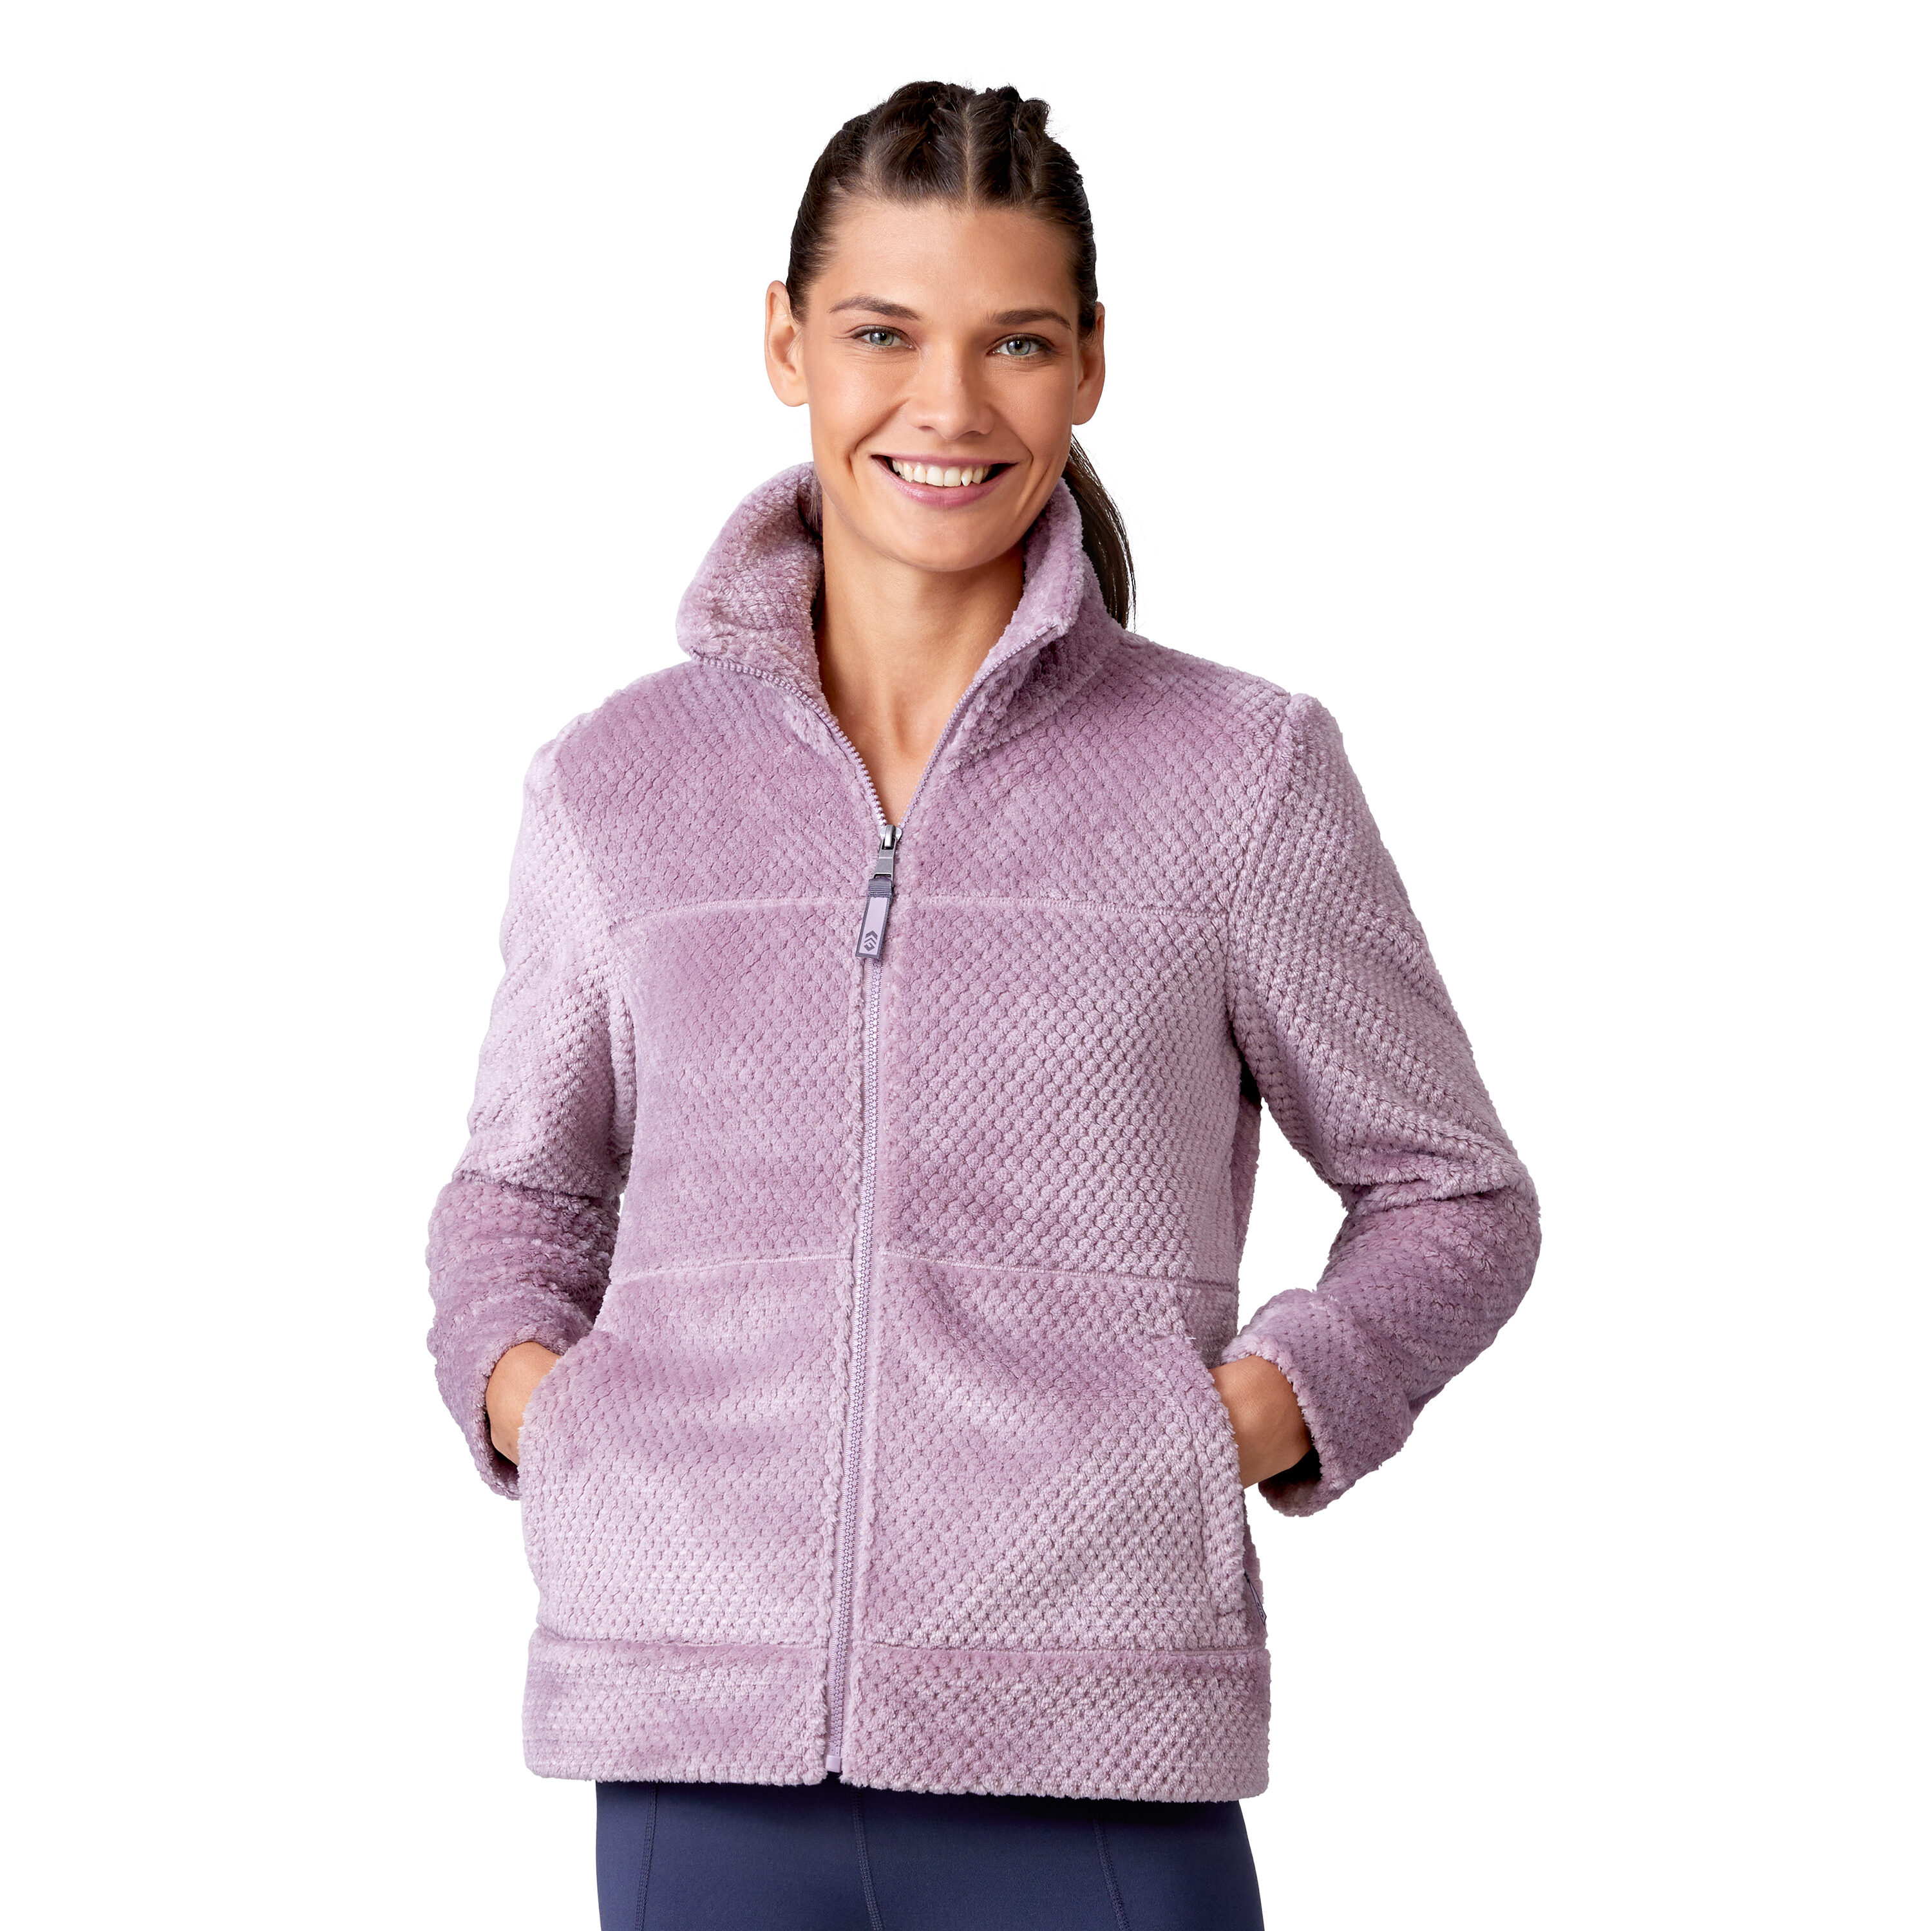 Free Country Women's Thistle Polyester Insulated Fleece (Large)